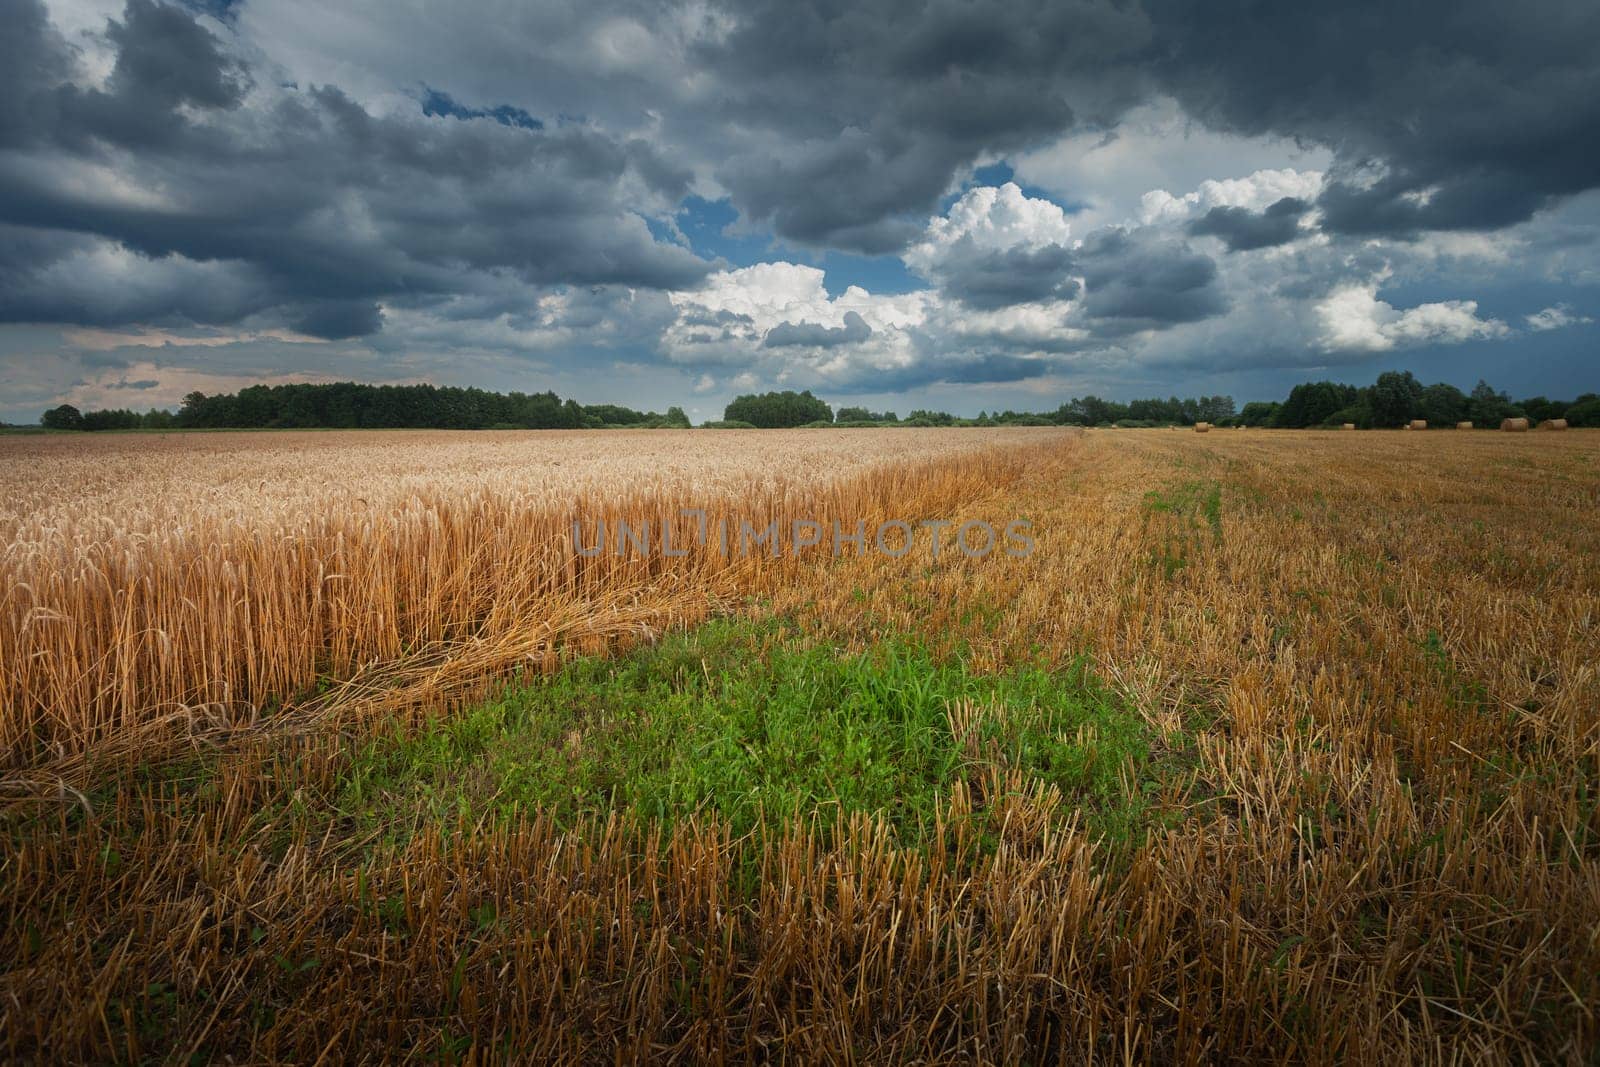 A field with grain and a cloudy sky, a view on a July day by darekb22